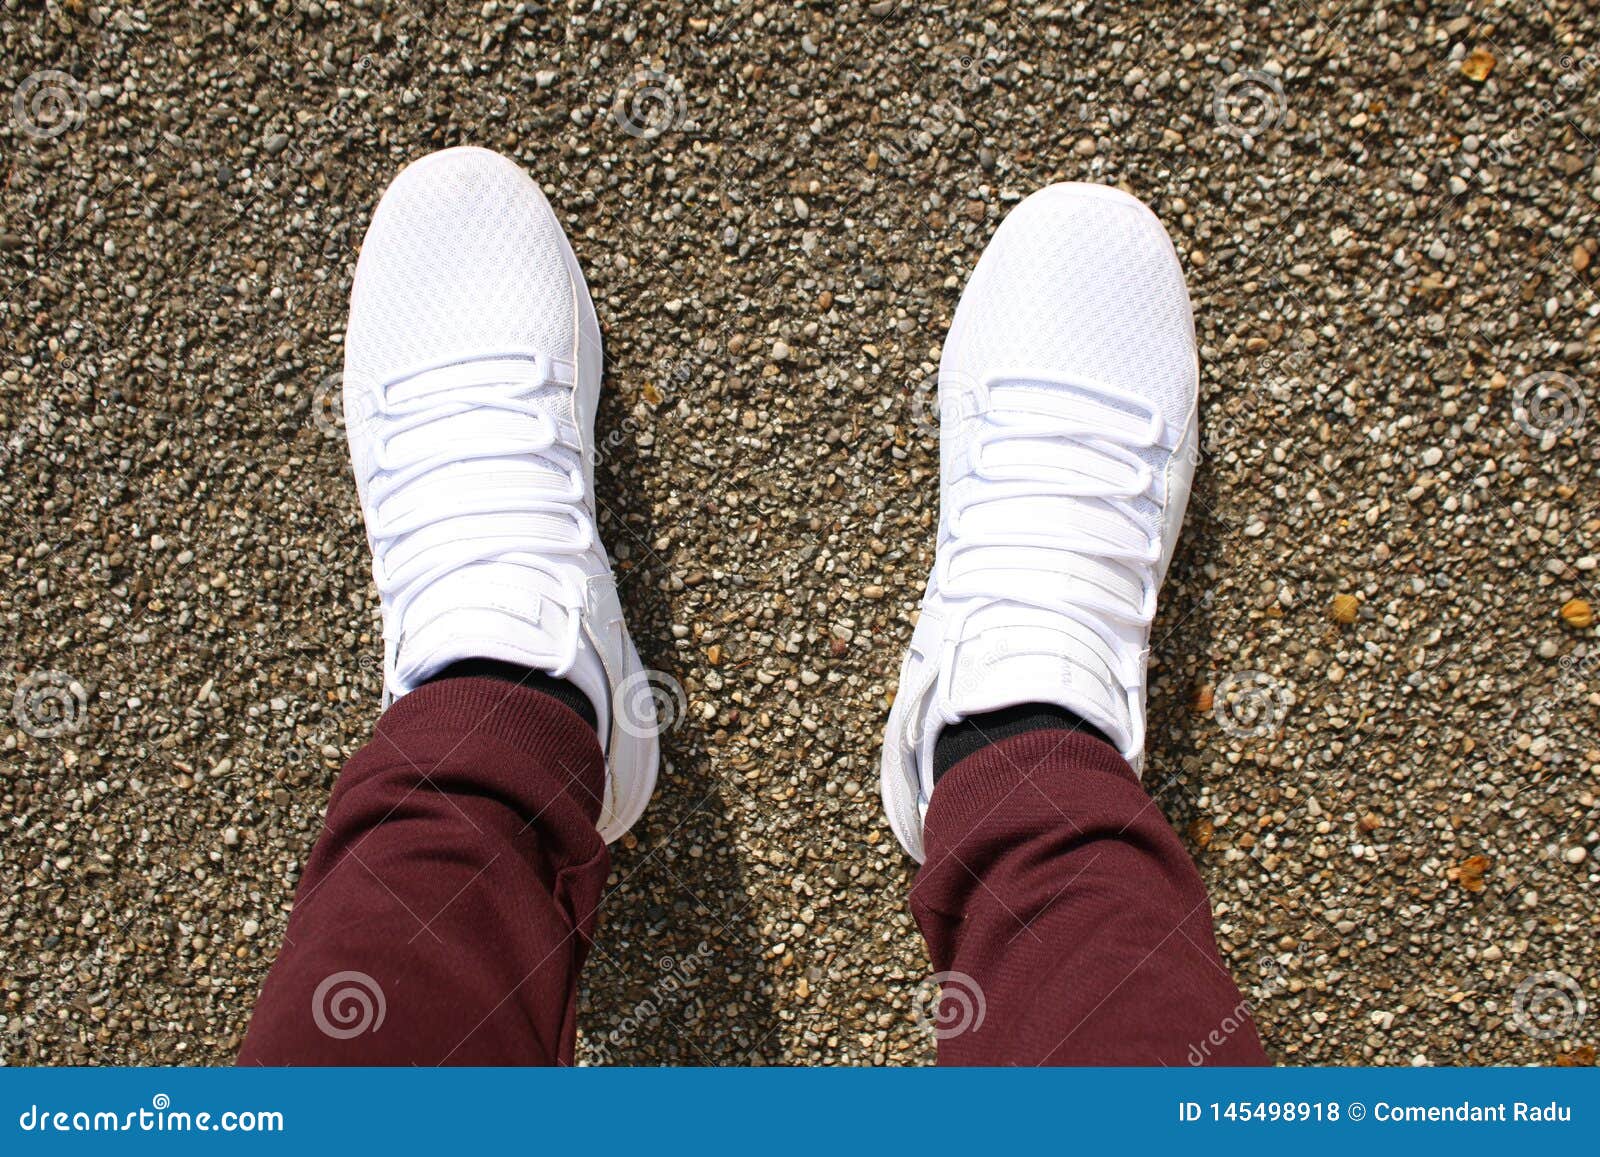 A Man`s Feet Shoes in Sneakers Stock Photo - Image of asphalt, outdoors ...